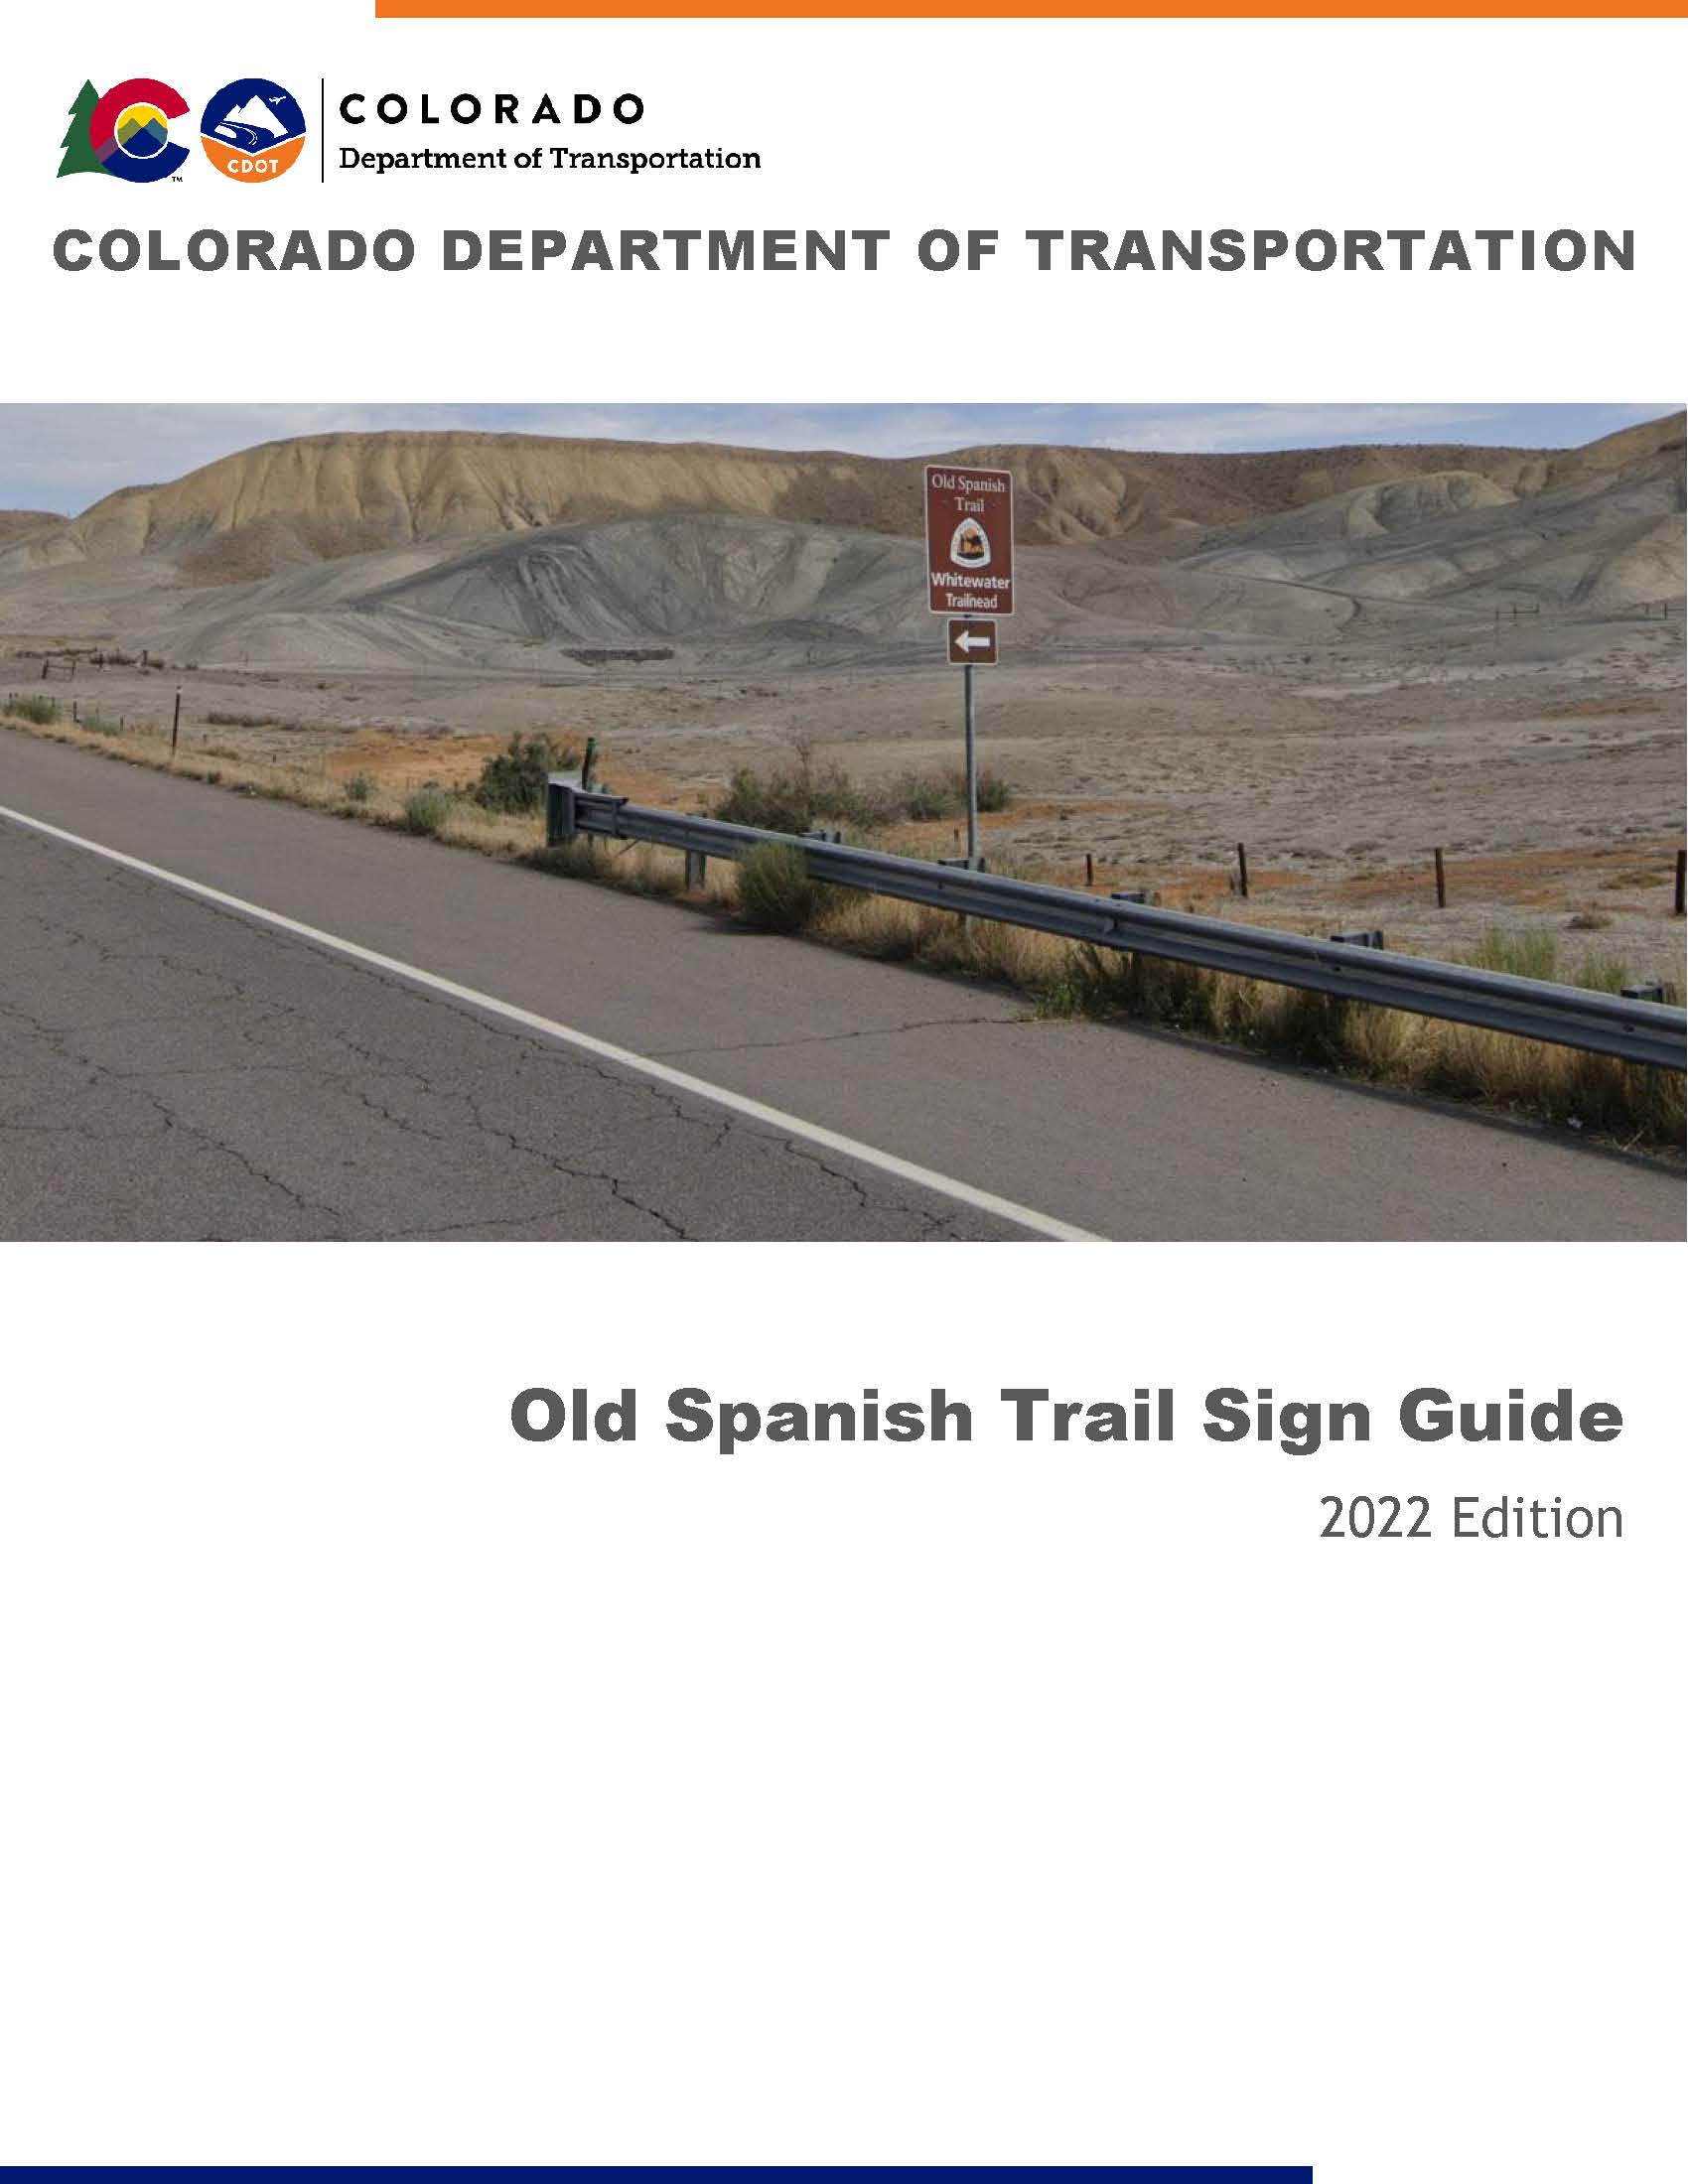 Old Spanish Trail Guide detail image